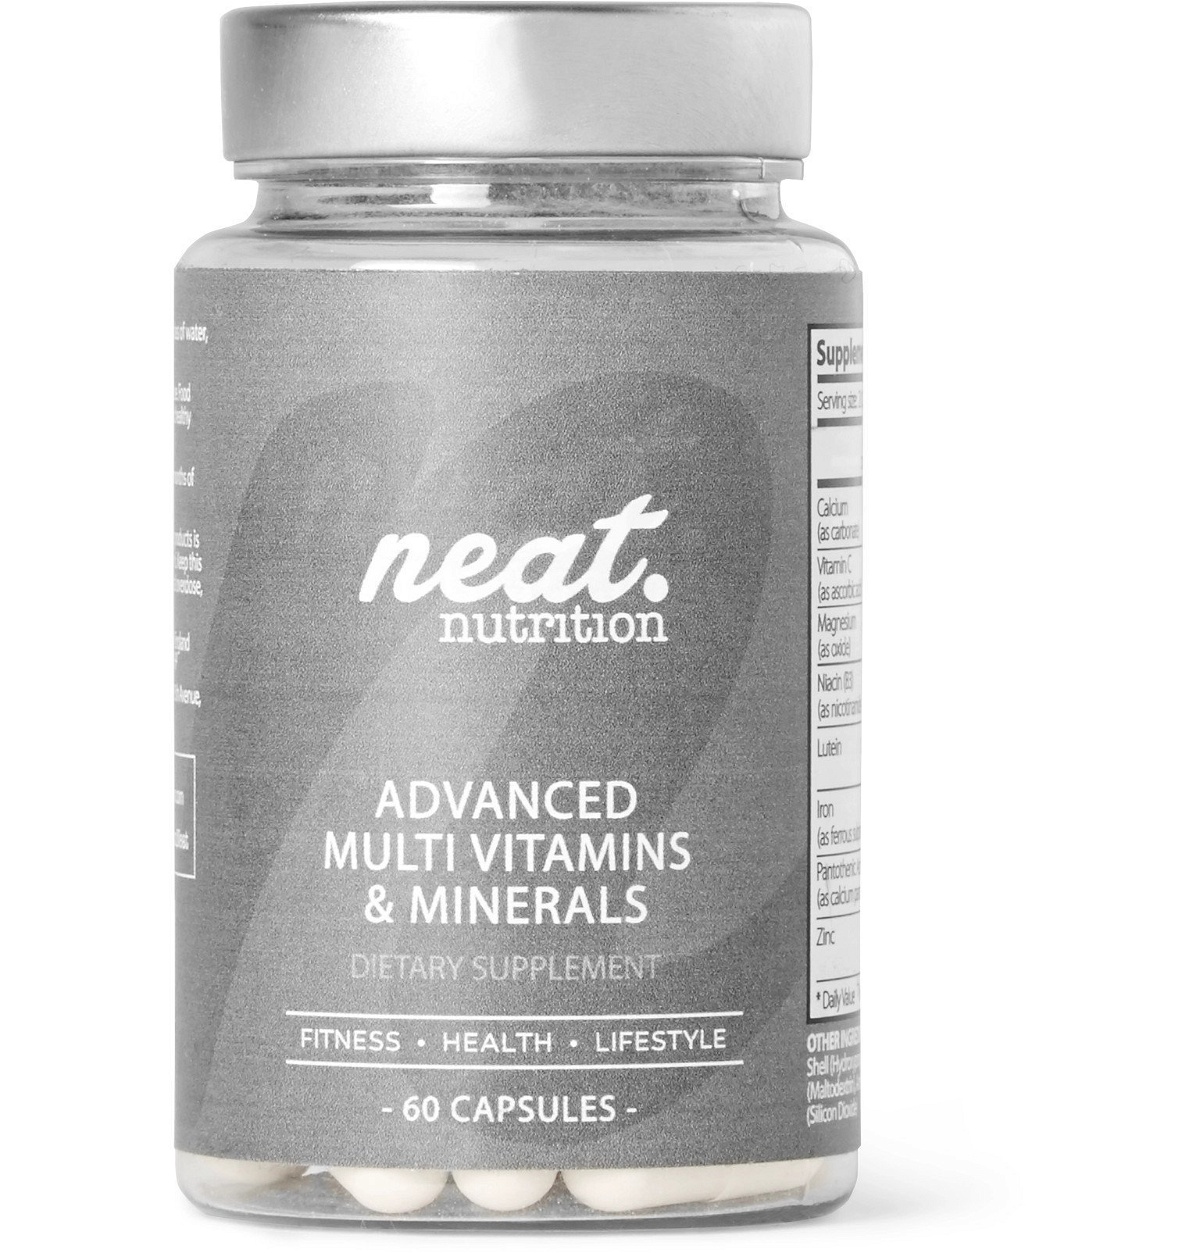 Photo: Neat Nutrition - Advanced Multi Vitamins & Minerals, 60 Capsules - Colorless